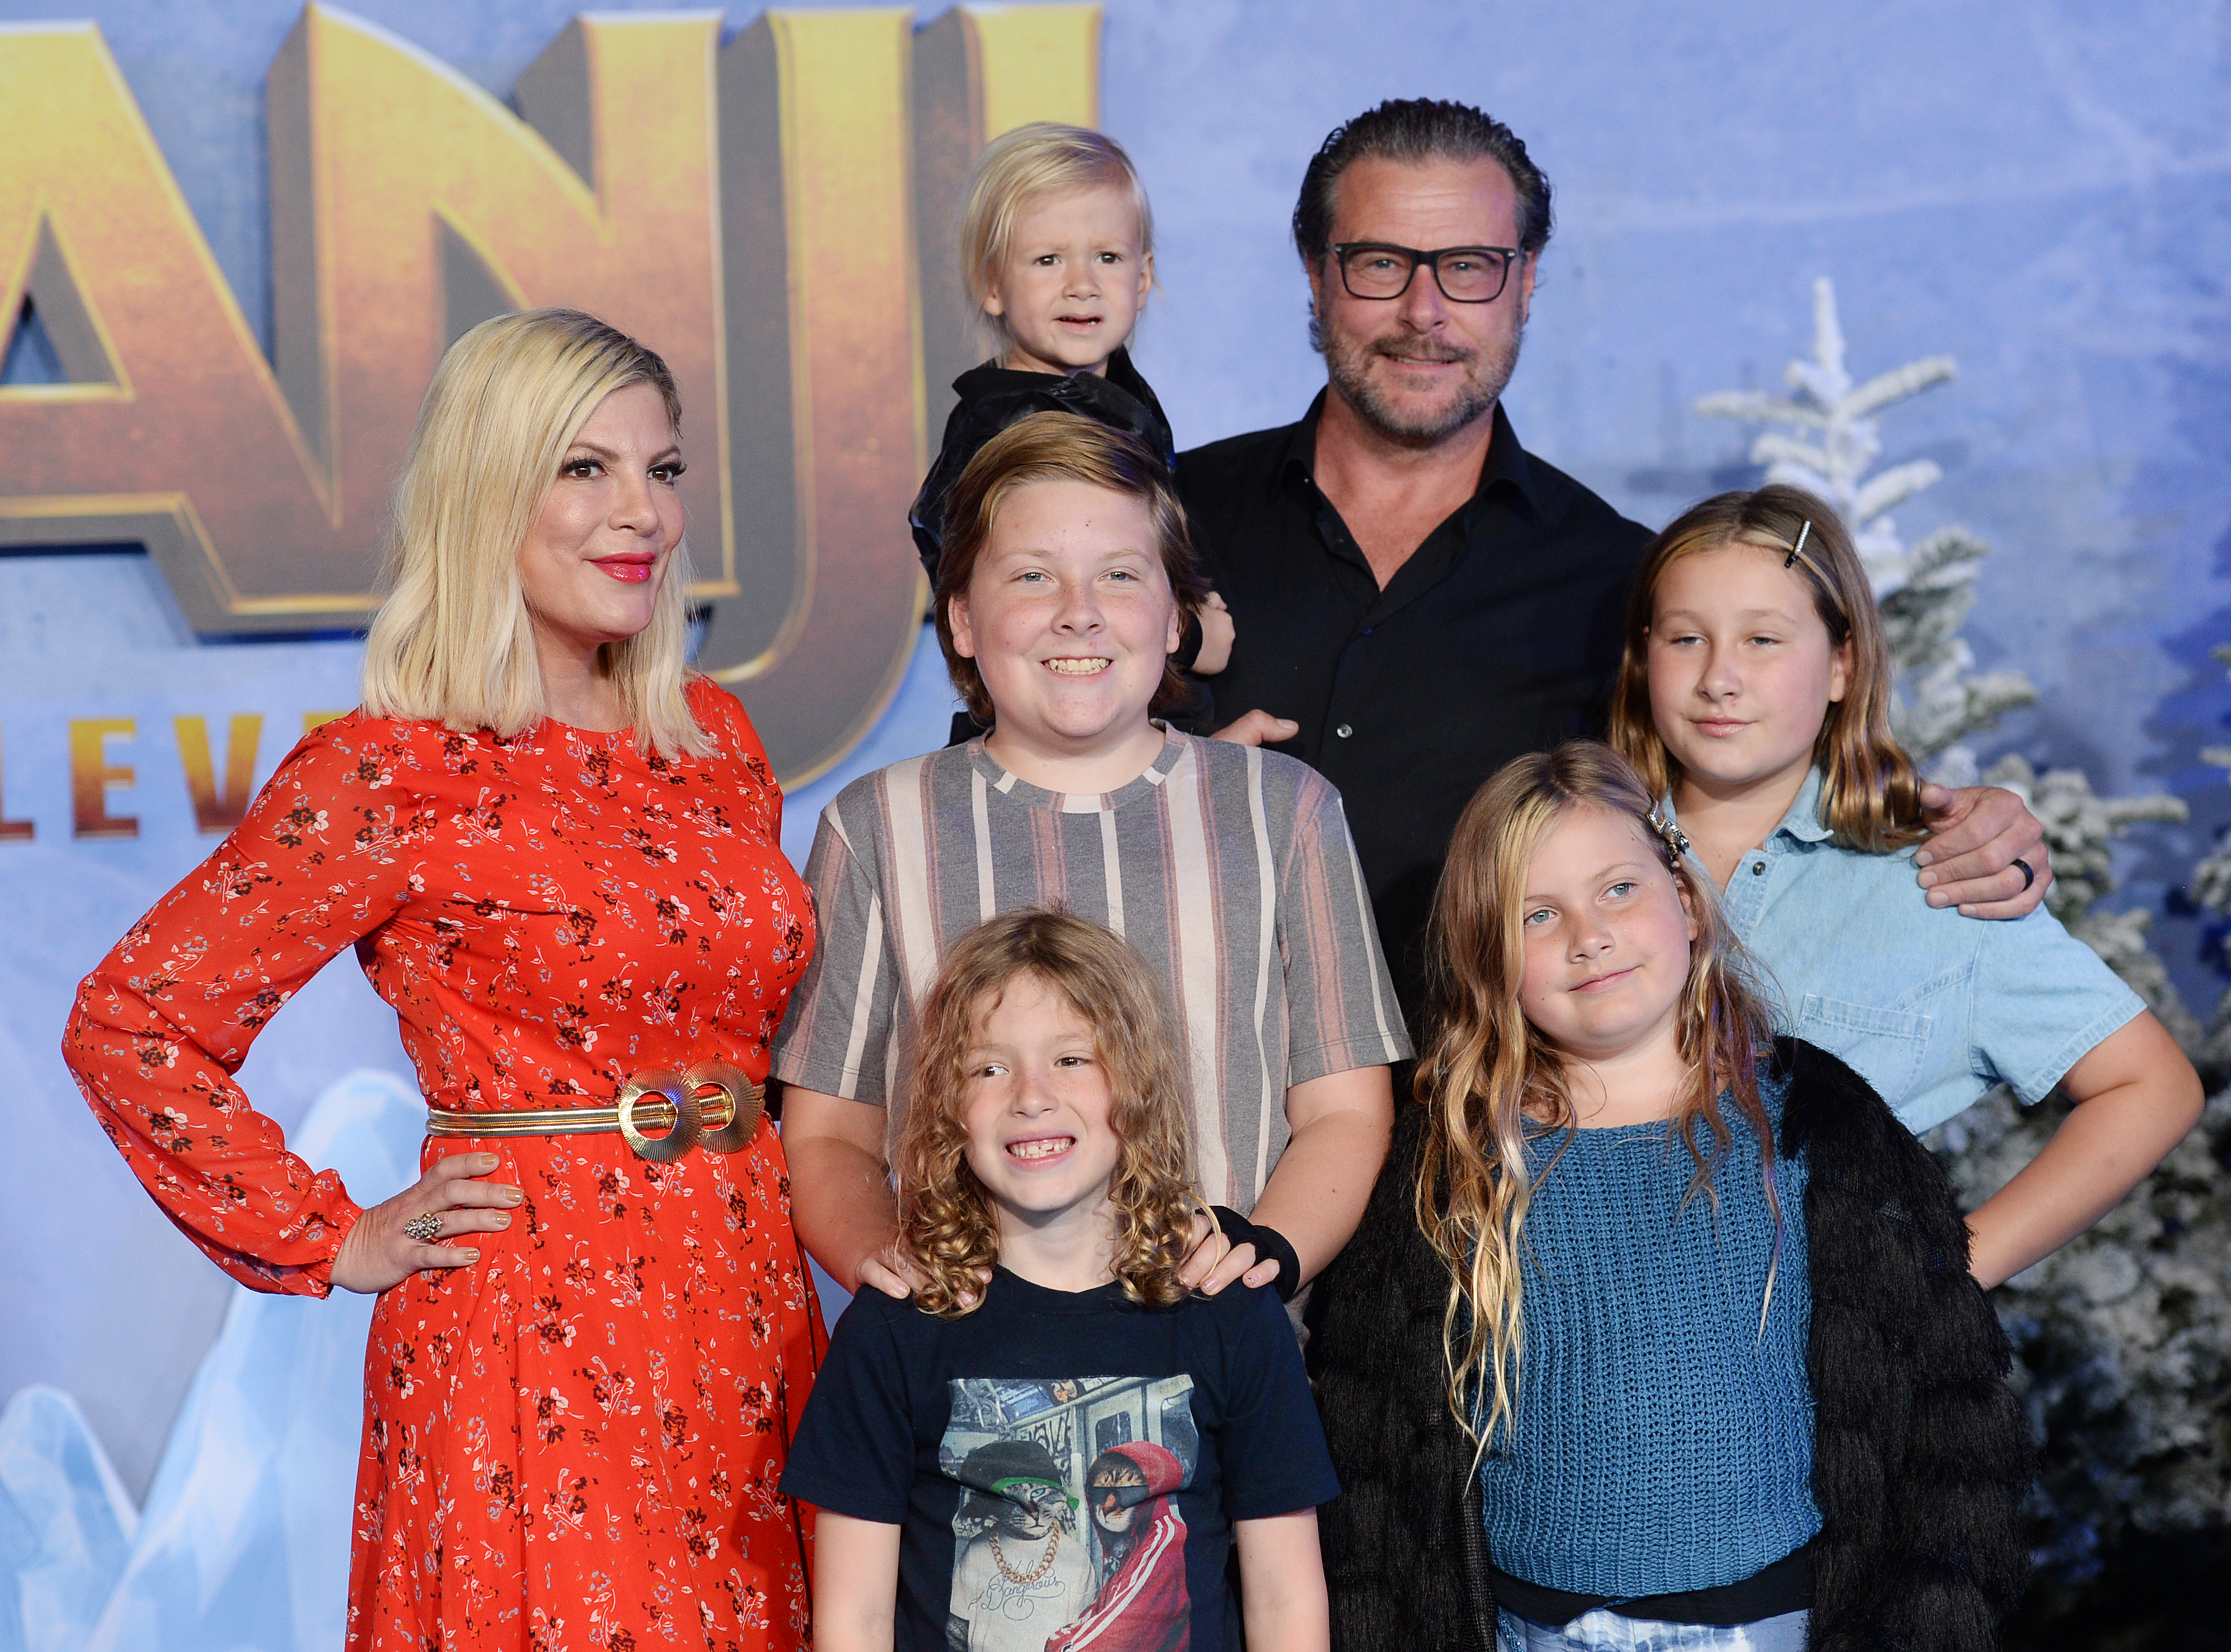 Are Tori Spelling and Dean McDermott Still Together?